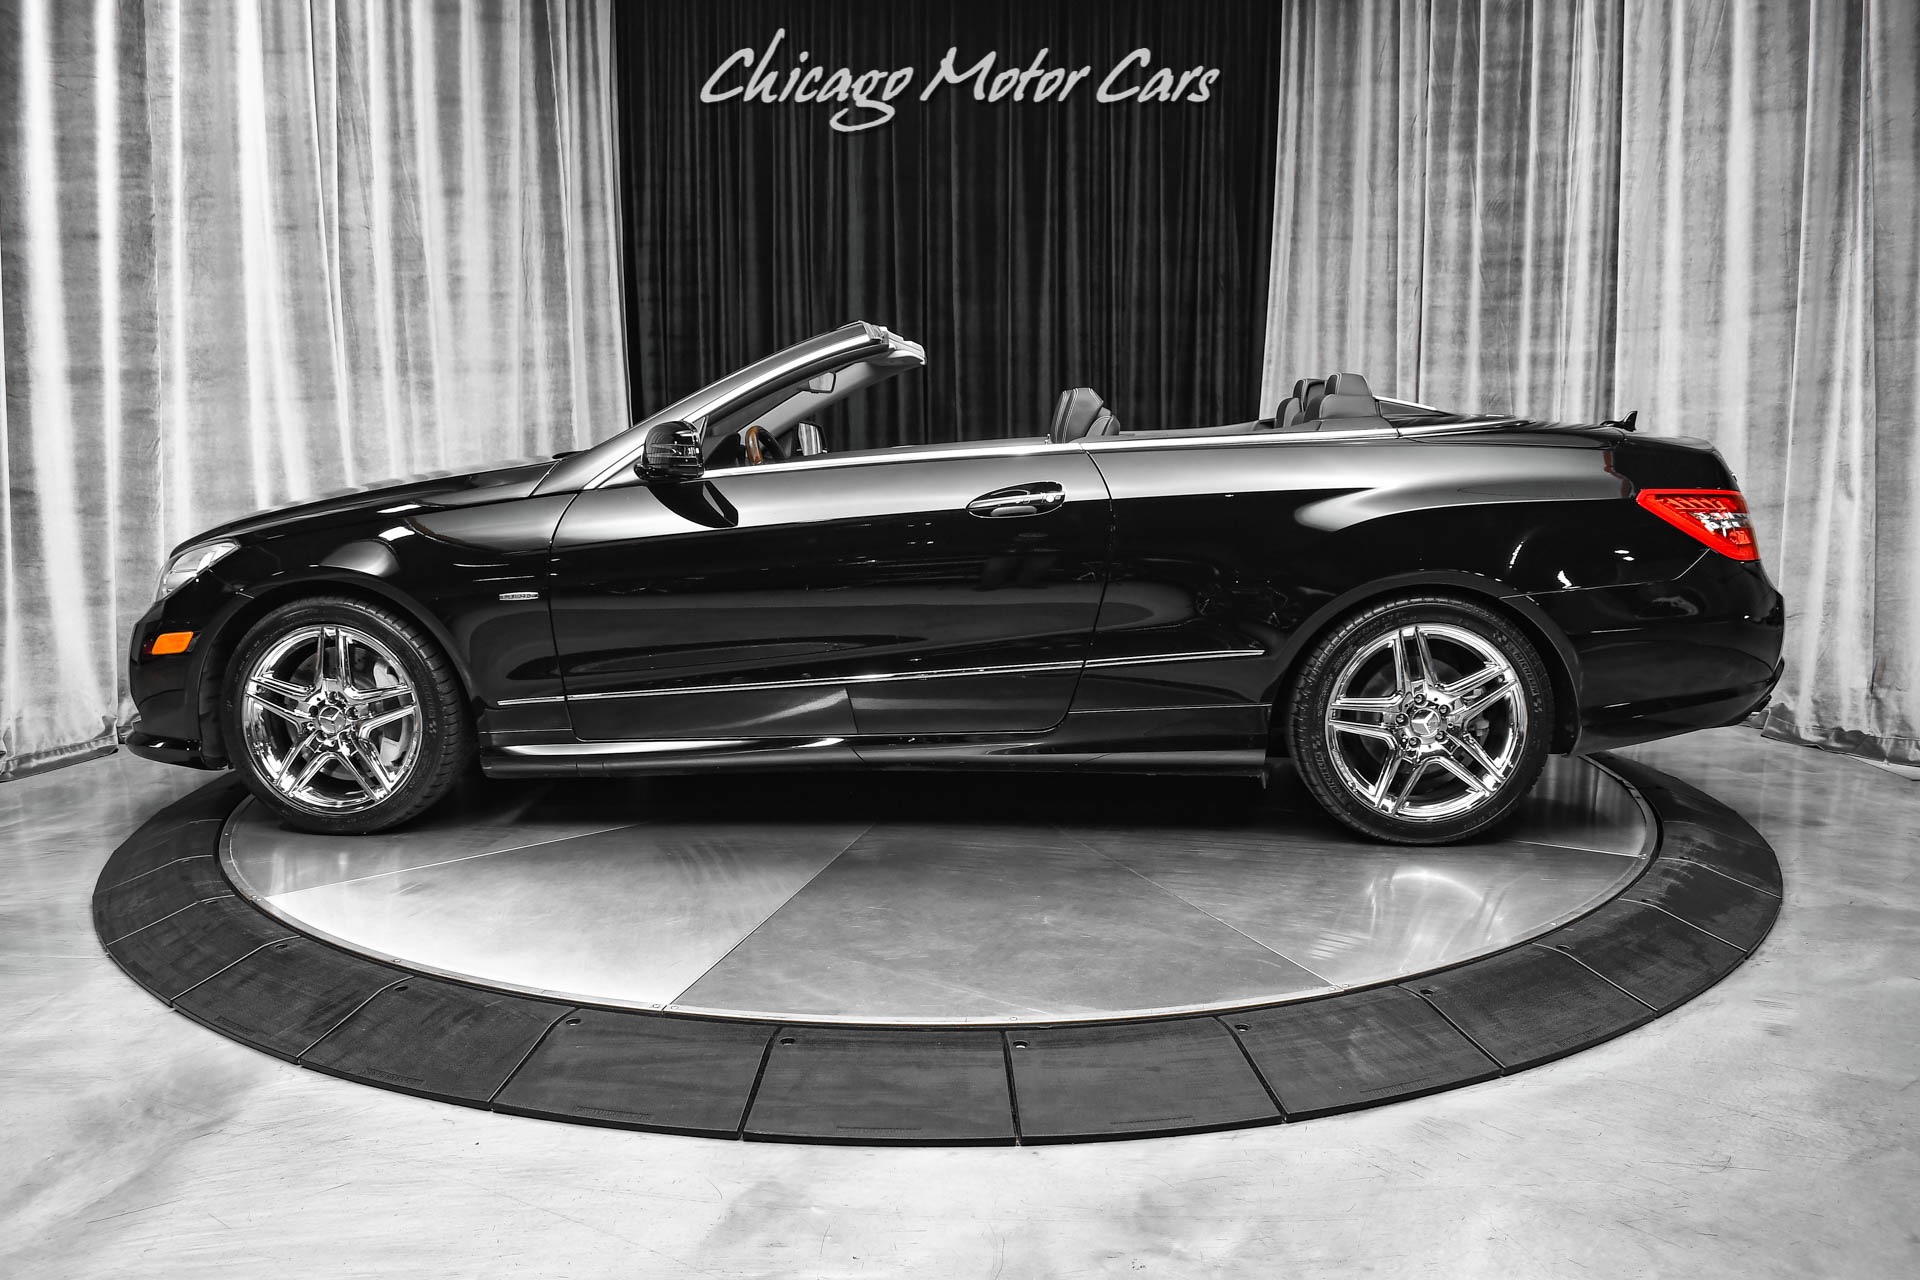 Used-2012-Mercedes-Benz-E550-Convertible-Premium-Package-Appearence-Package-Incredible-Example-Perfec